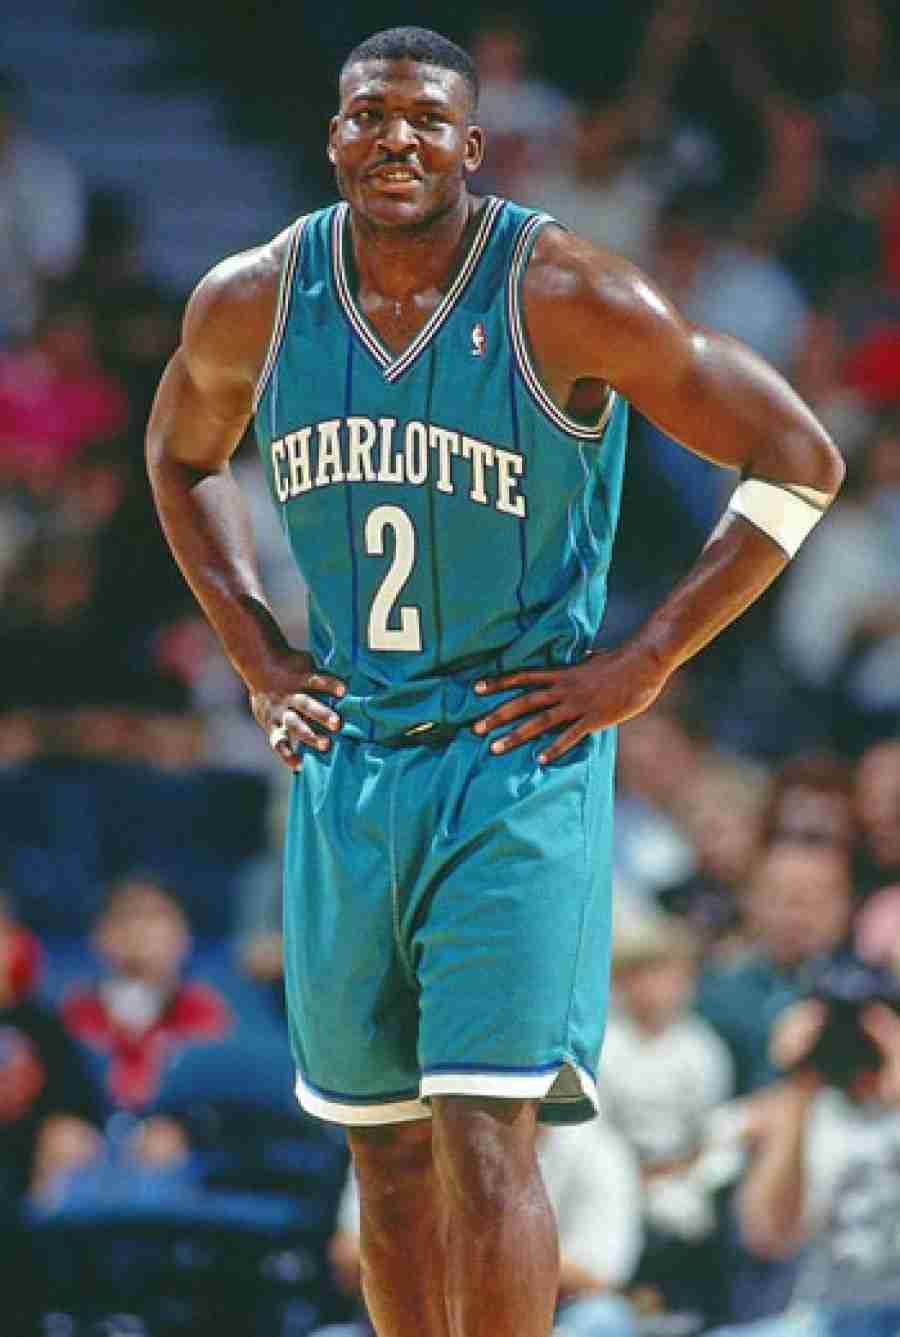 Not in Hall of Fame - 44. Larry Johnson